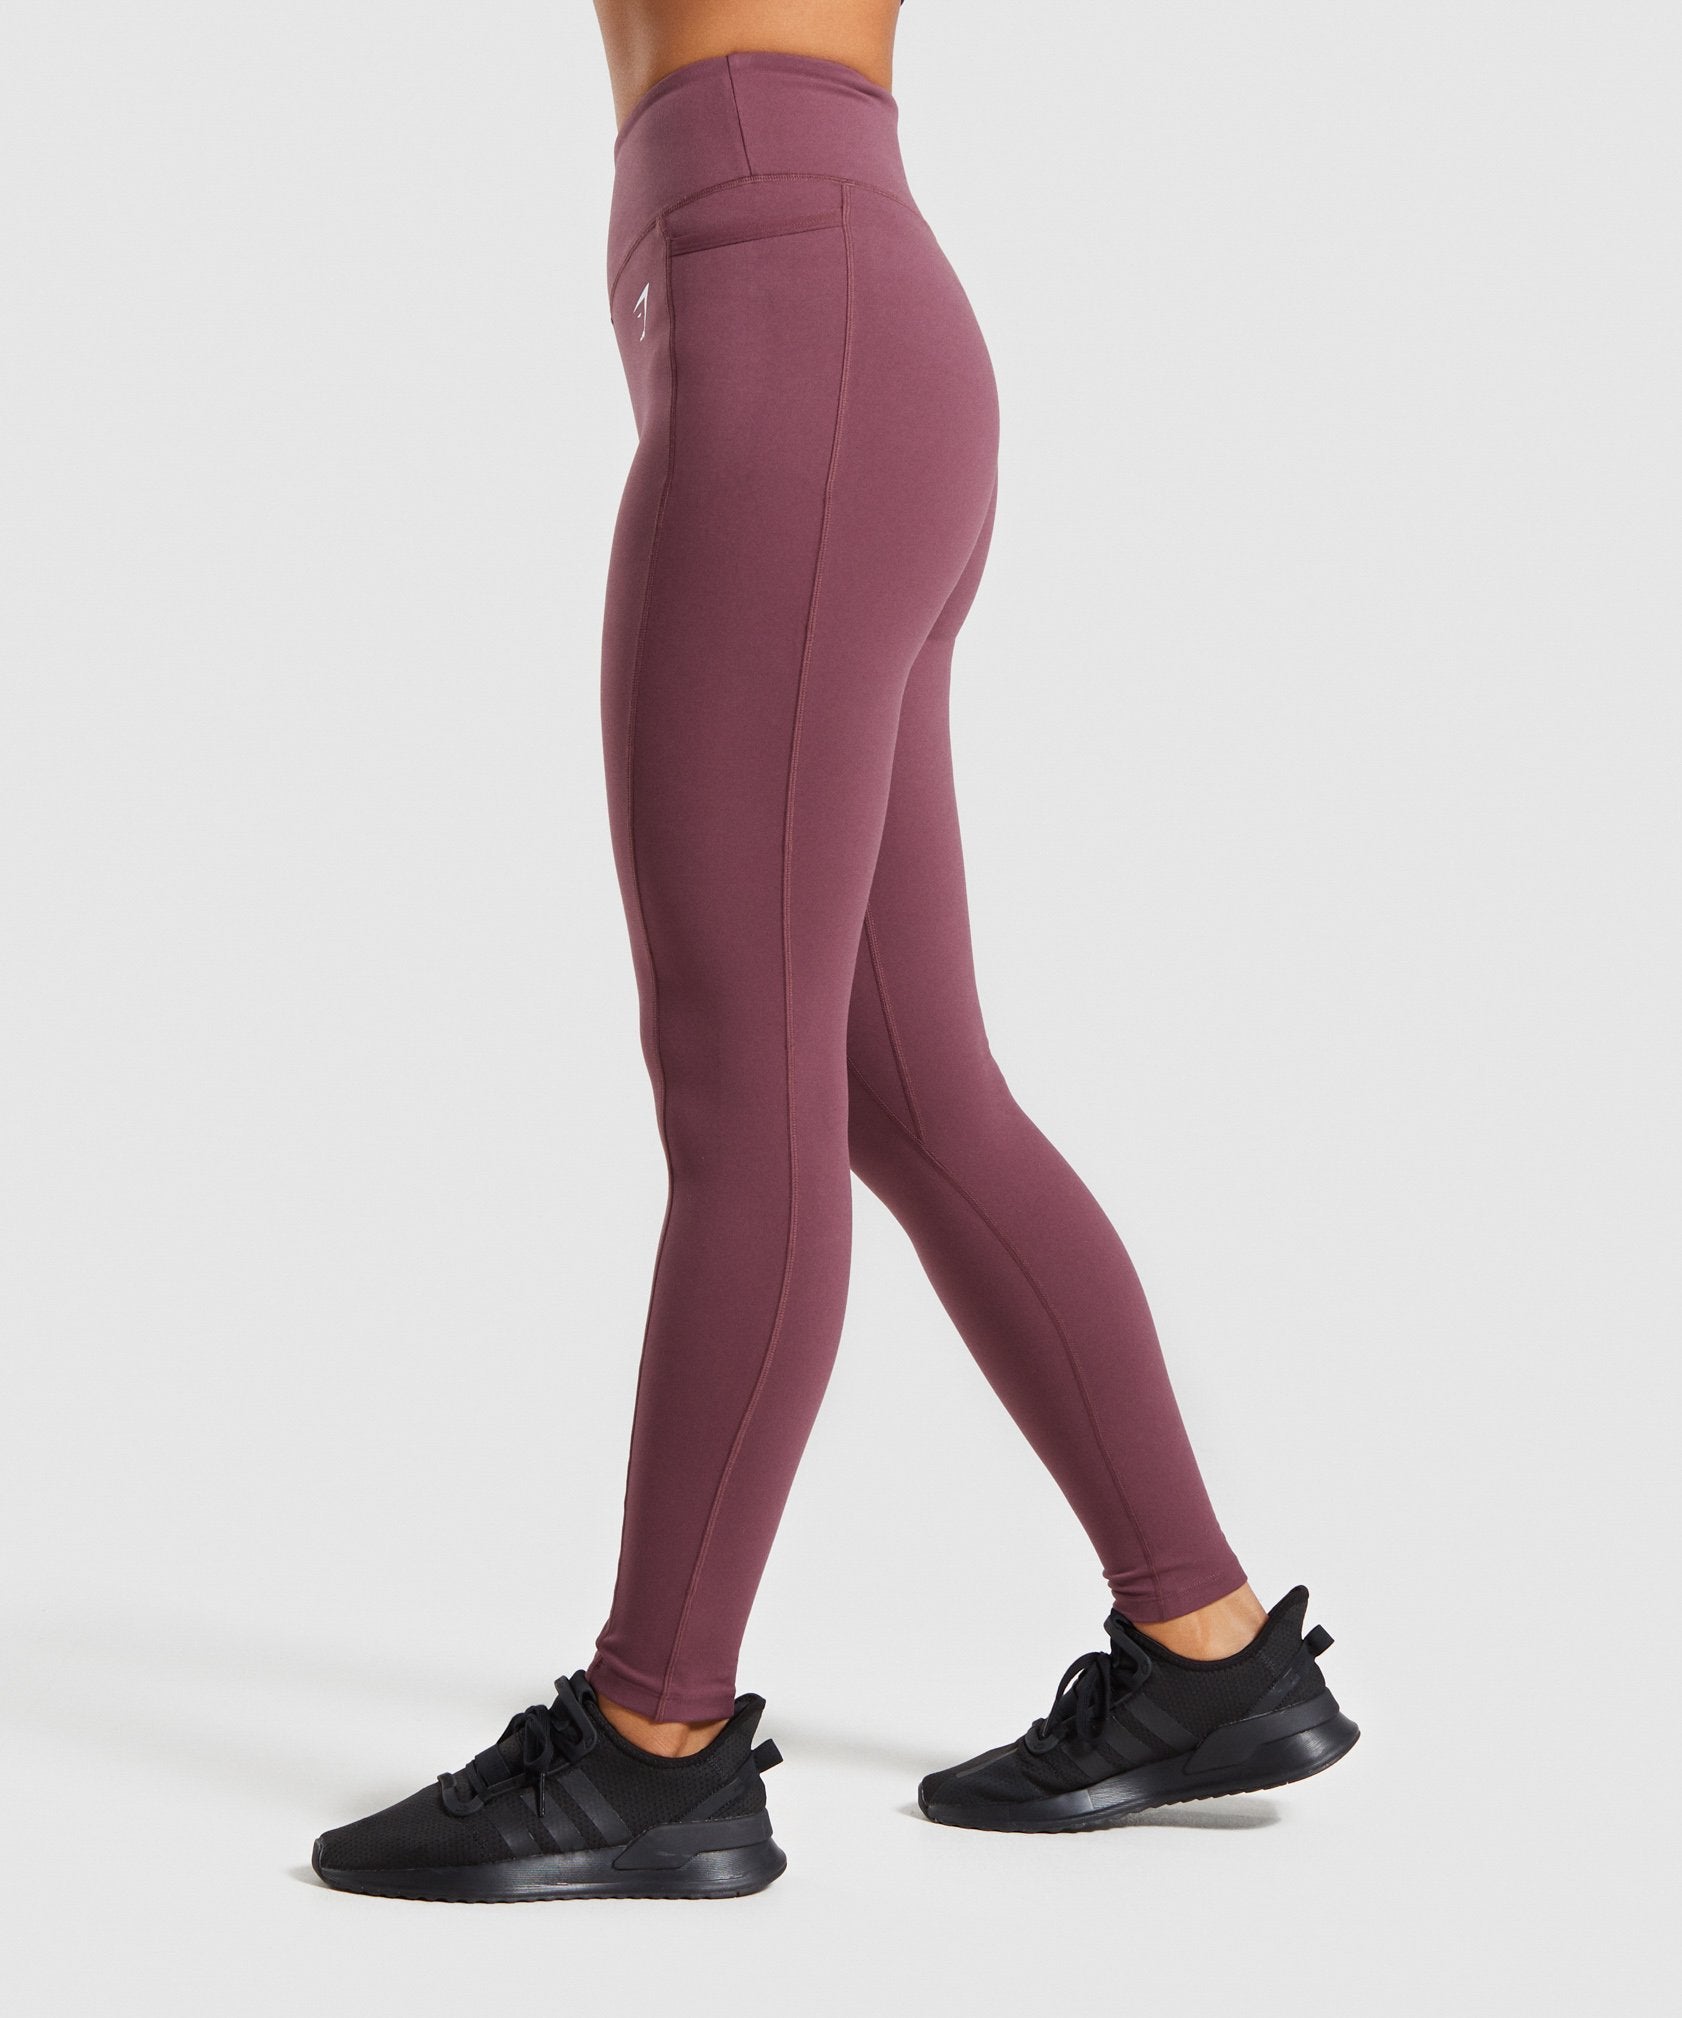 Dreamy Leggings in Berry Red - view 3